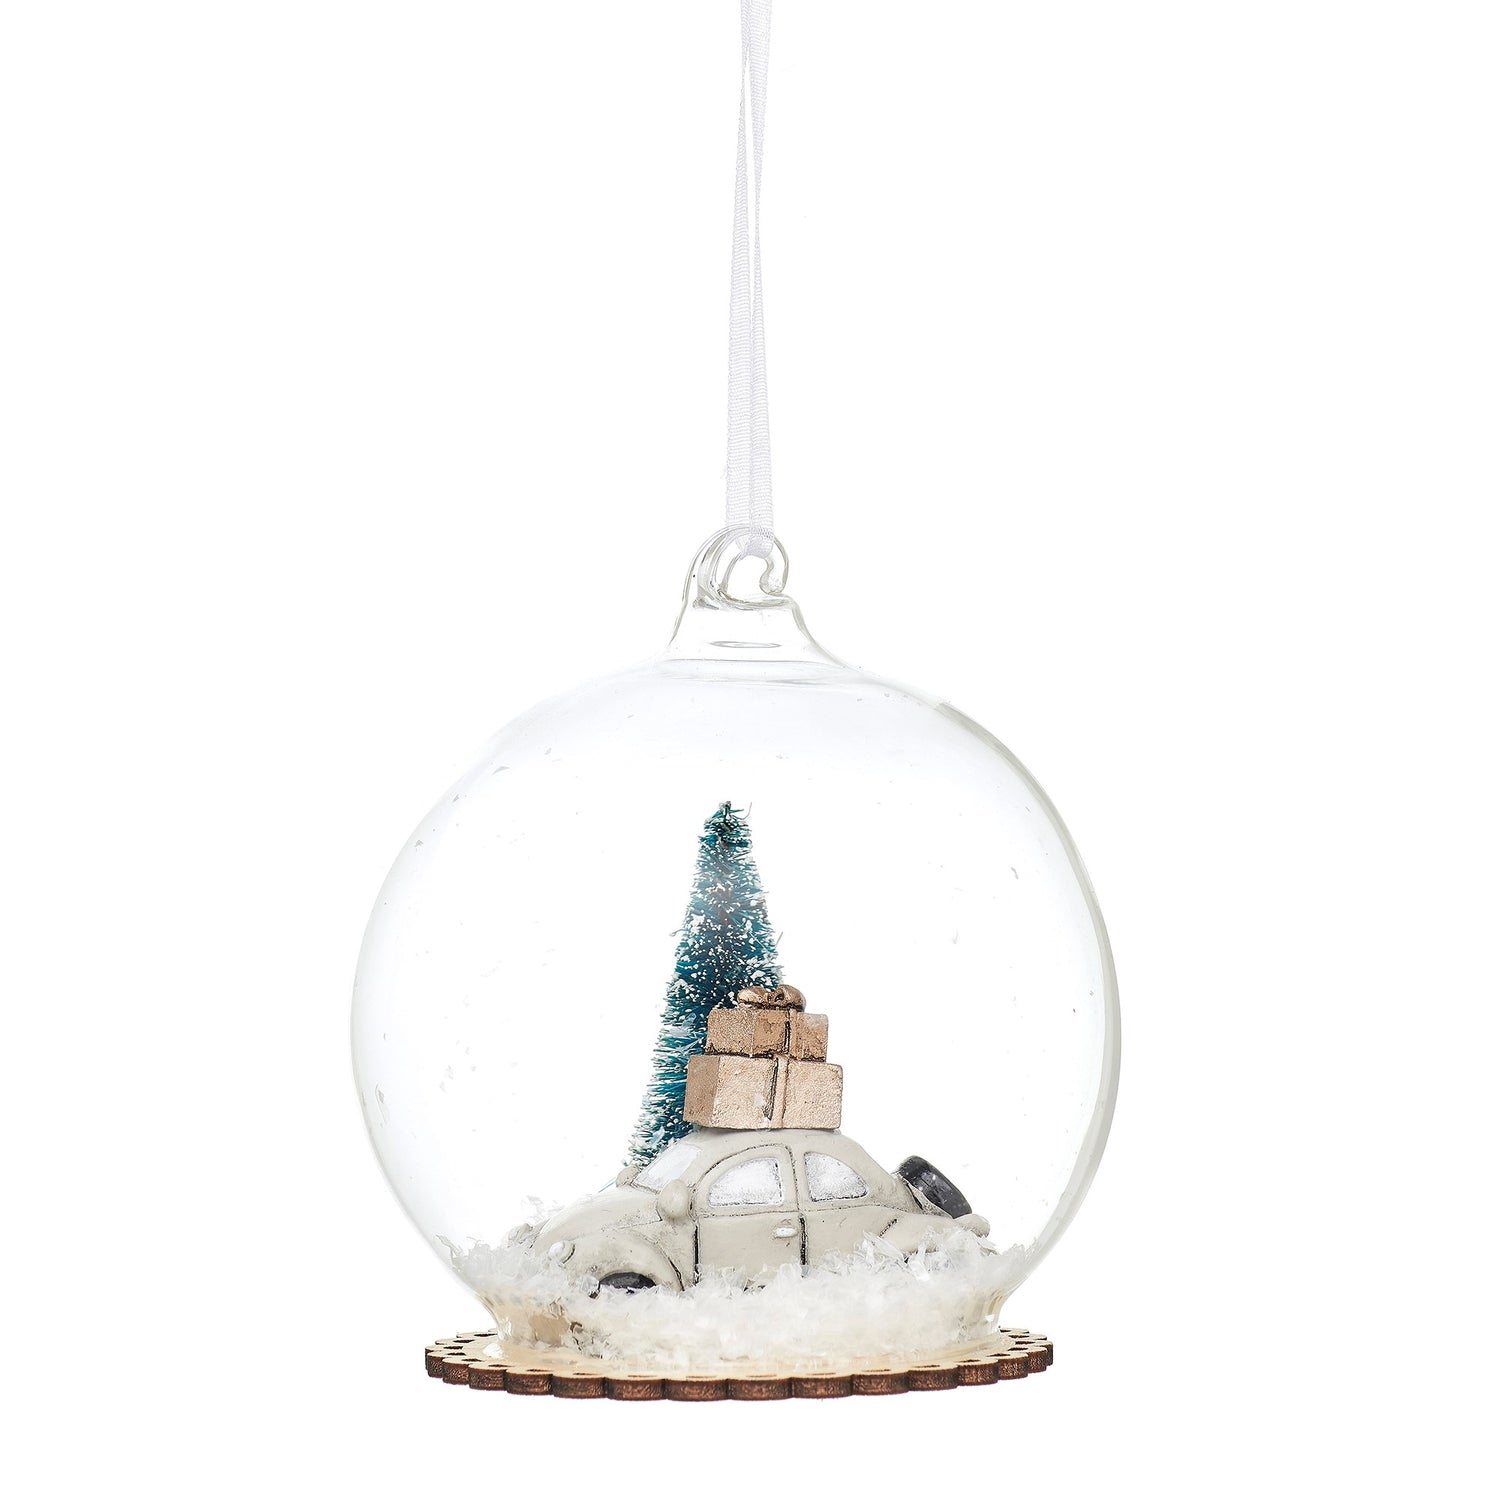 It doesn't really get any more magical than this!! Reminisce of those times gone by with this magical car with presents on the roof and tree in snow, snow globe glass Christmas tree decoration!